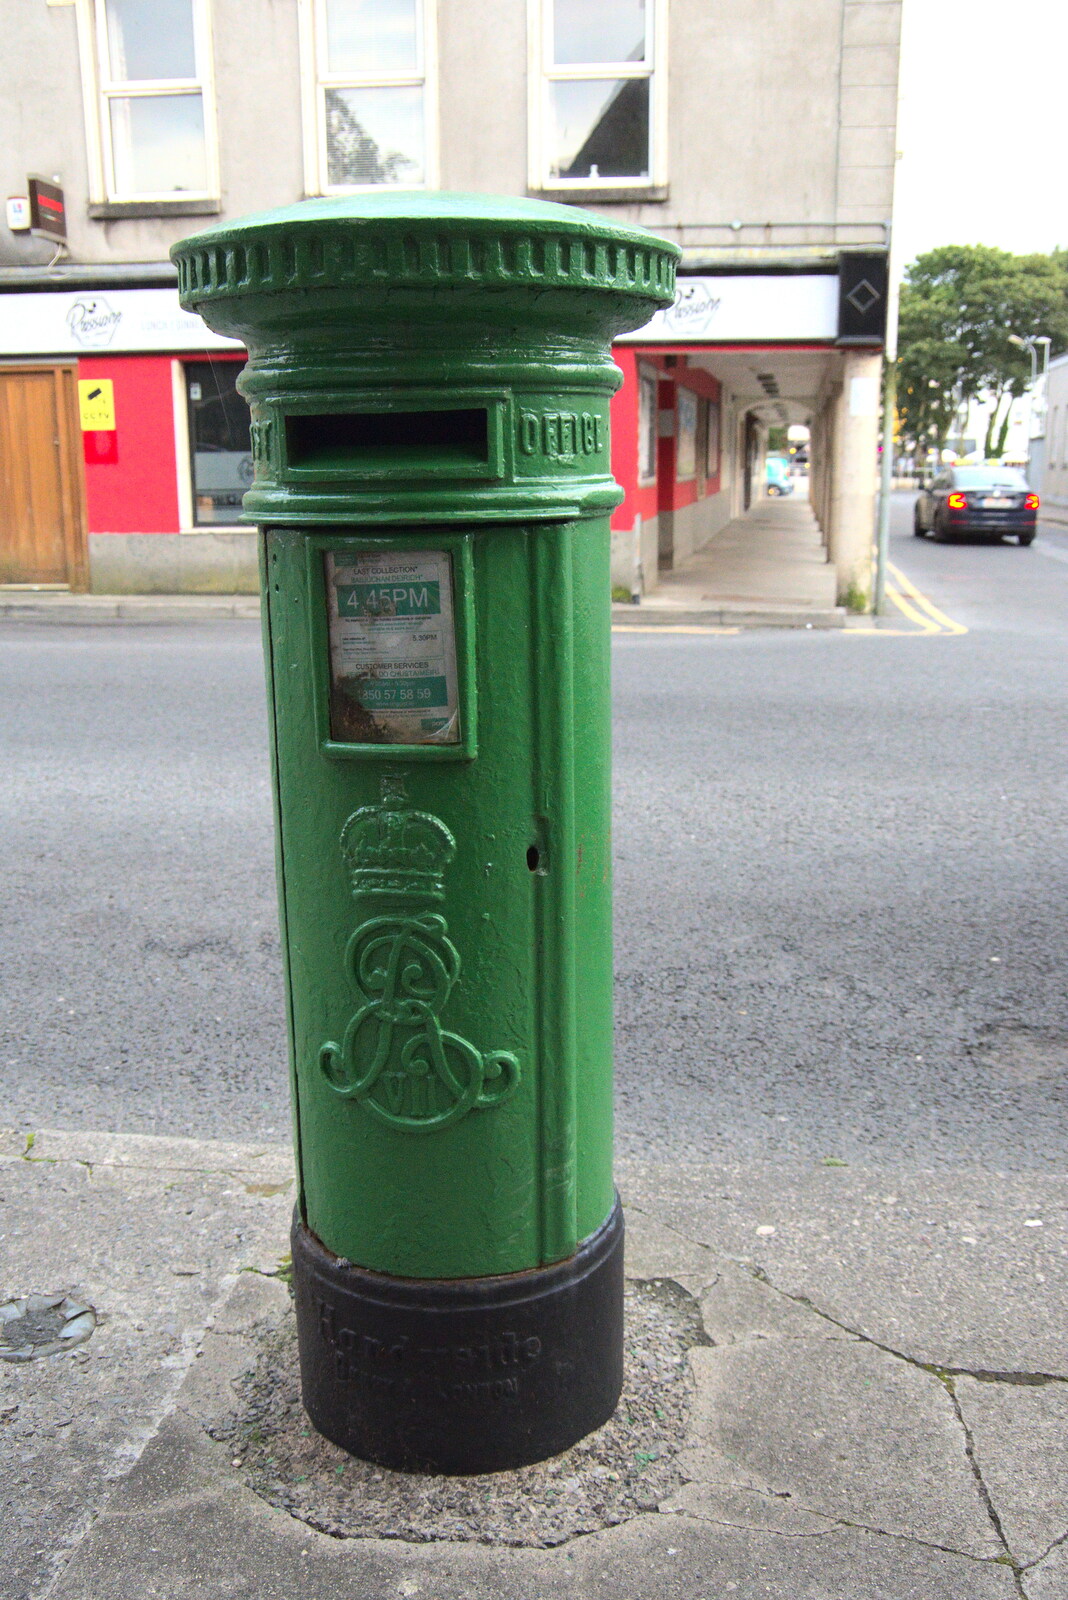 Pints of Guinness and Streedagh Beach, Grange and Sligo, Ireland - 9th August 2021: A green-painted Edward VII post box